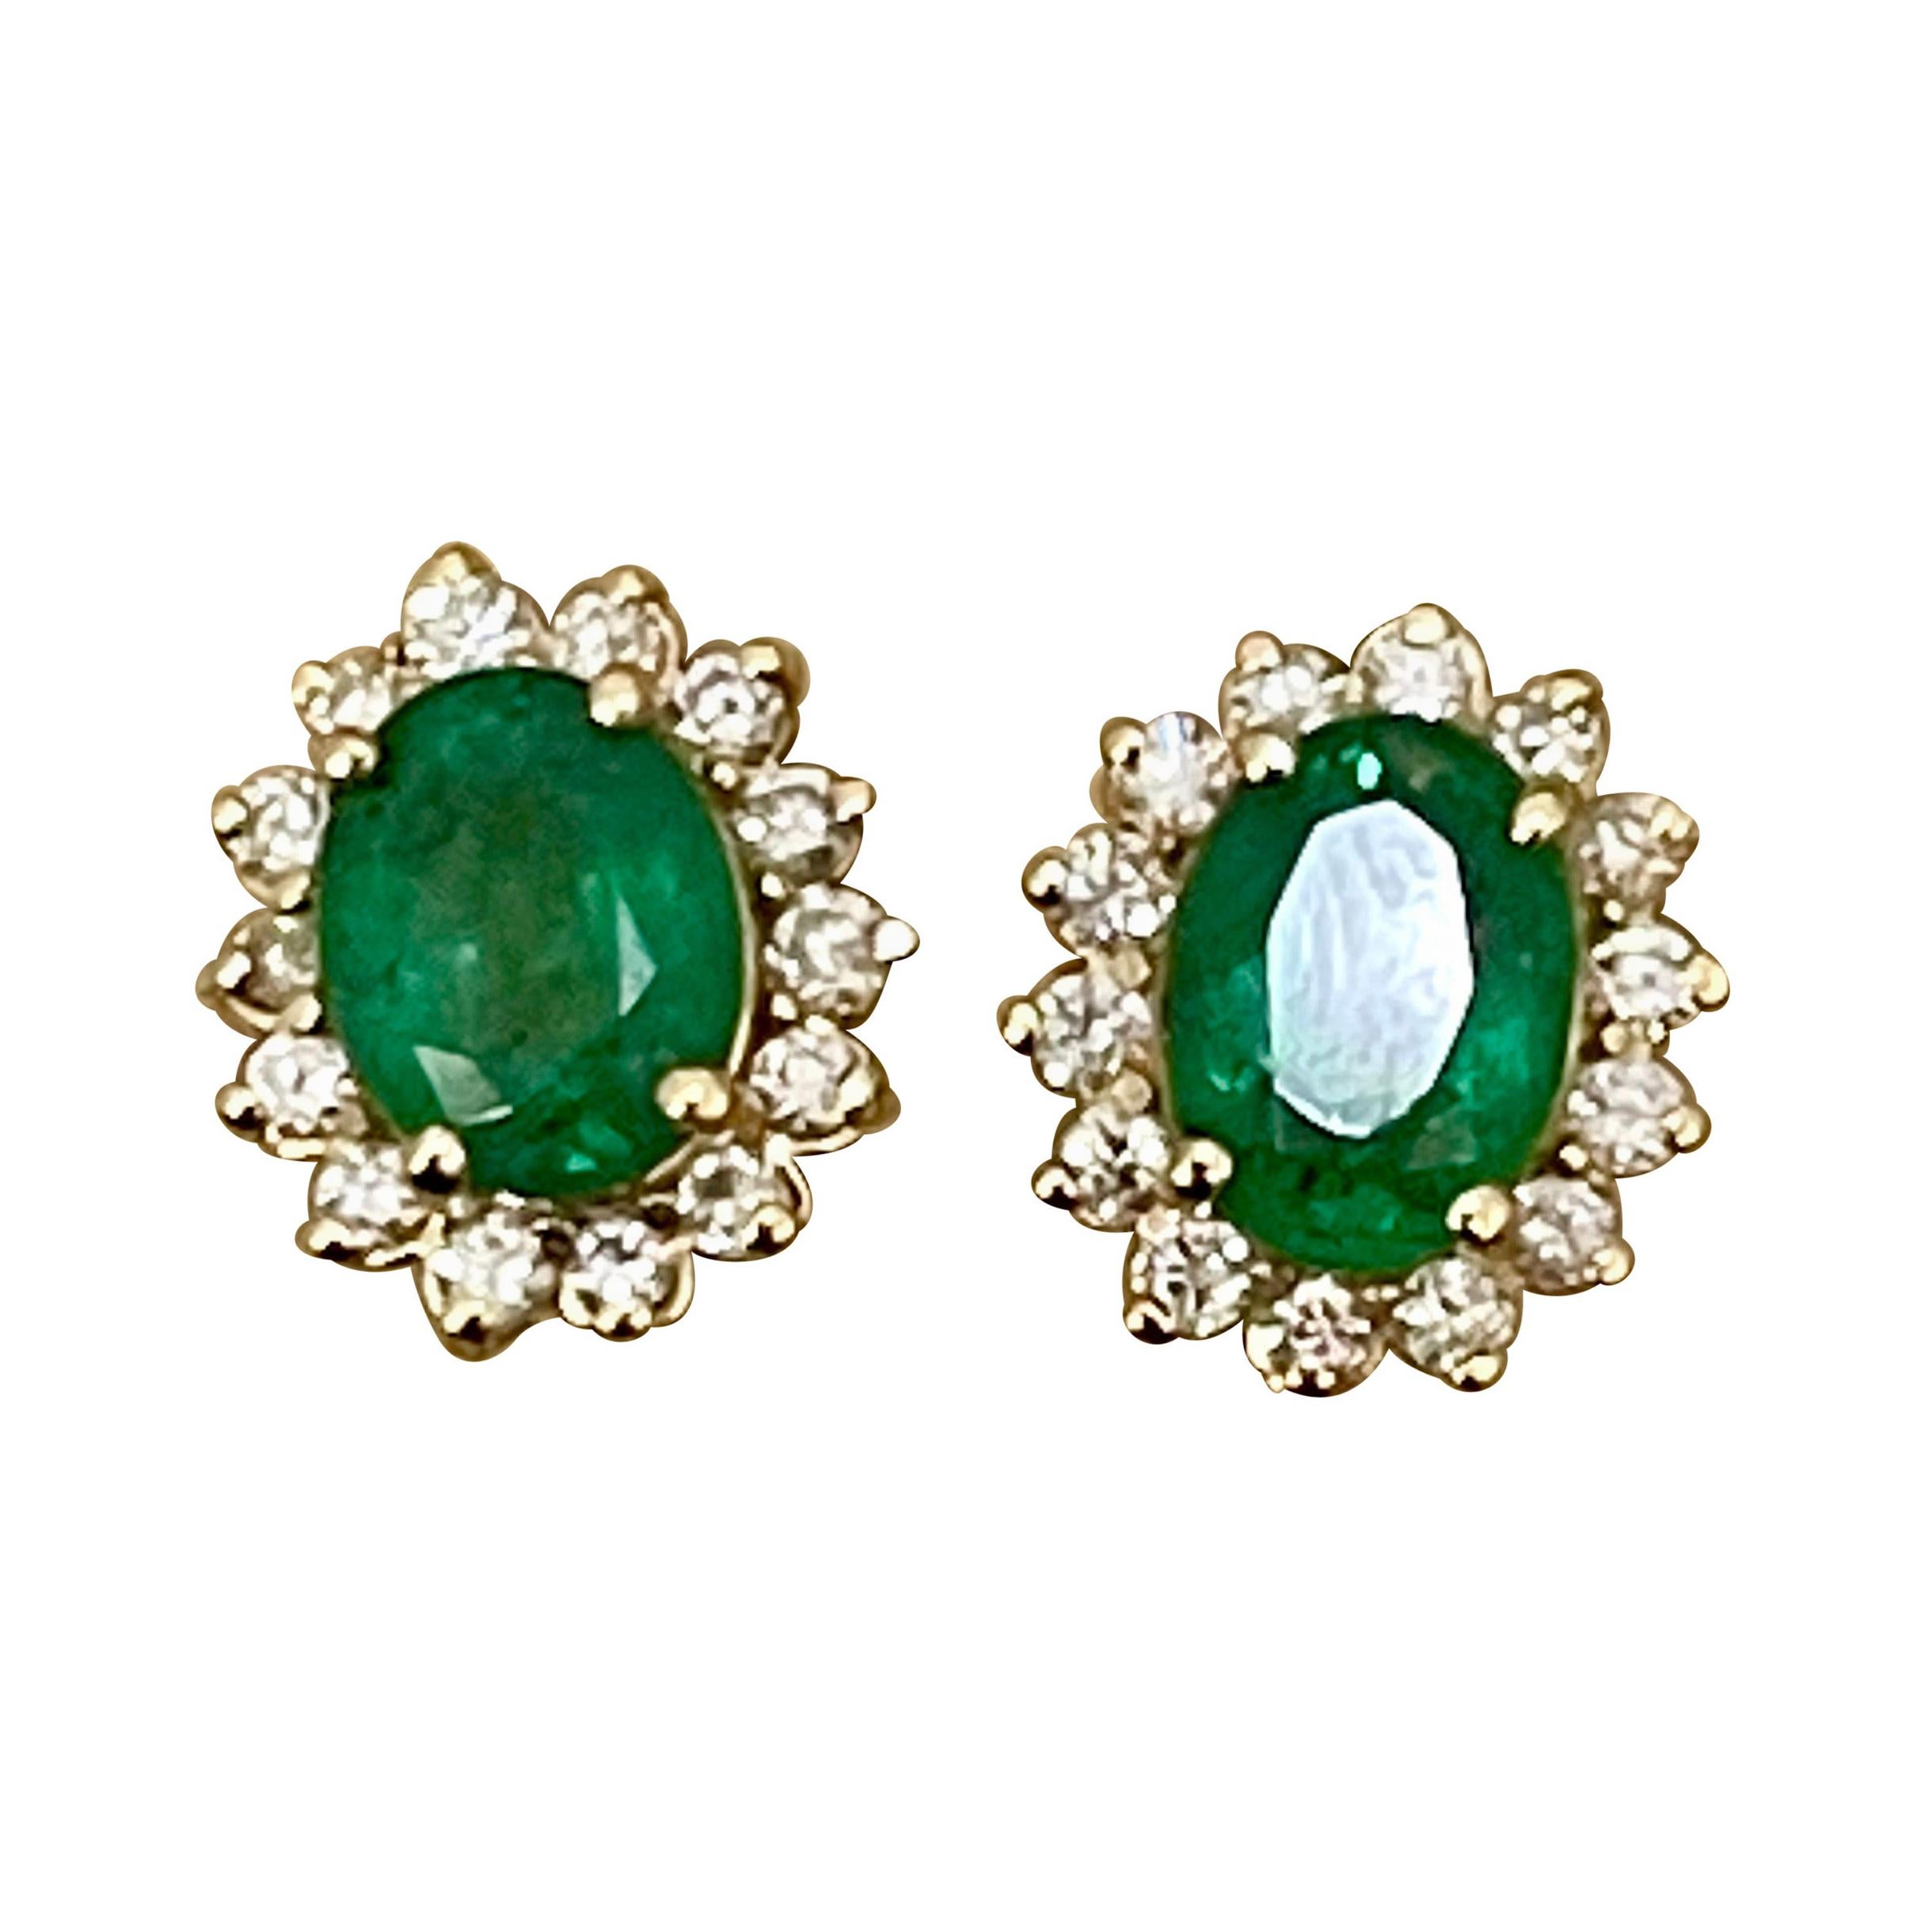 These exquisite post back earrings showcase a pair of natural oval-shaped emeralds weighing approximately 4 carats in total. The emeralds, originating from Brazil, possess a very fine quality, displaying a beautiful color, exceptional clarity, and